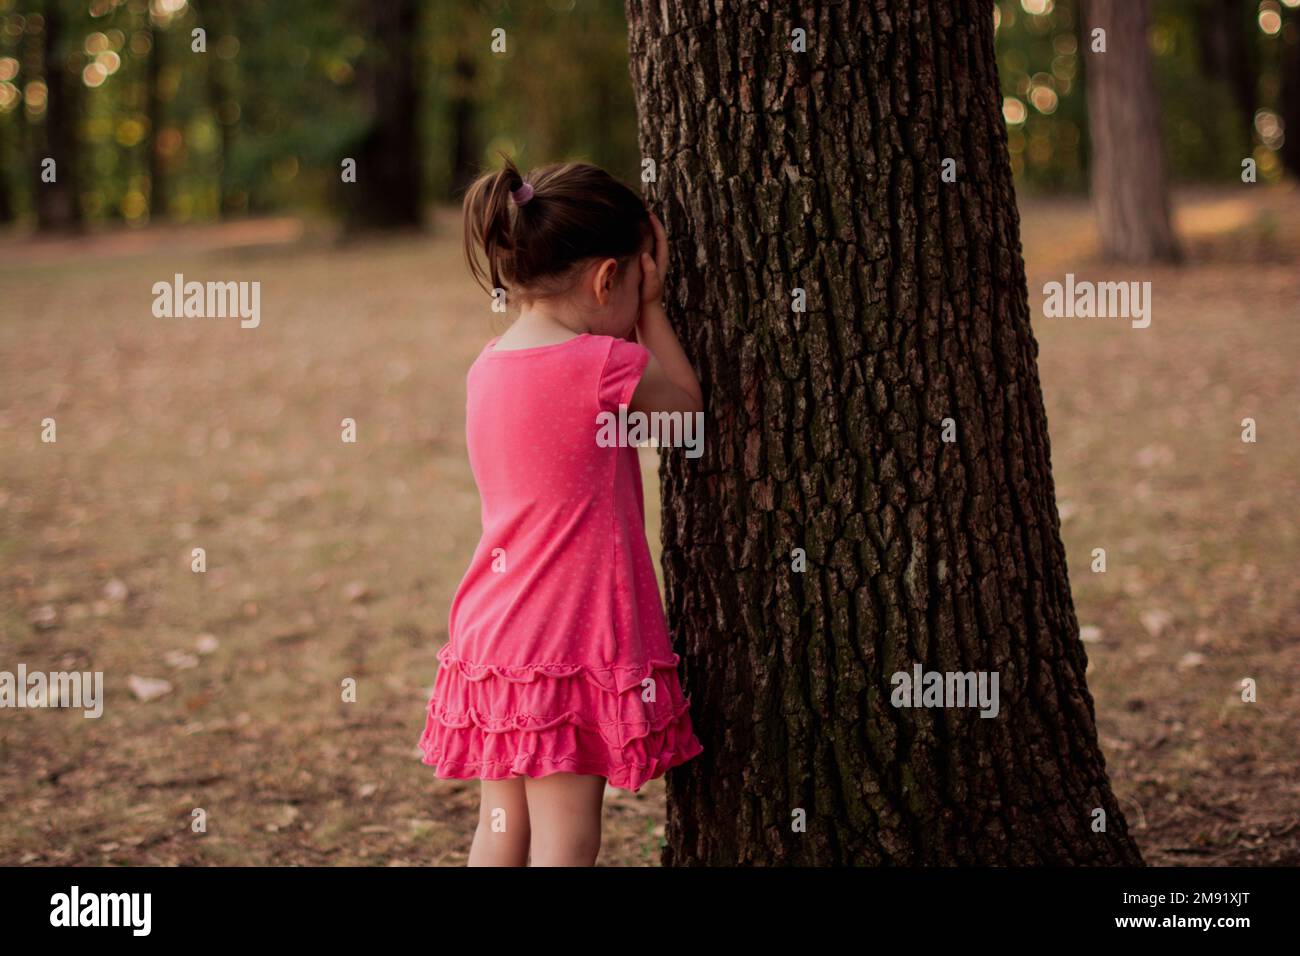 Children playing hide and seek at the park Vector Image